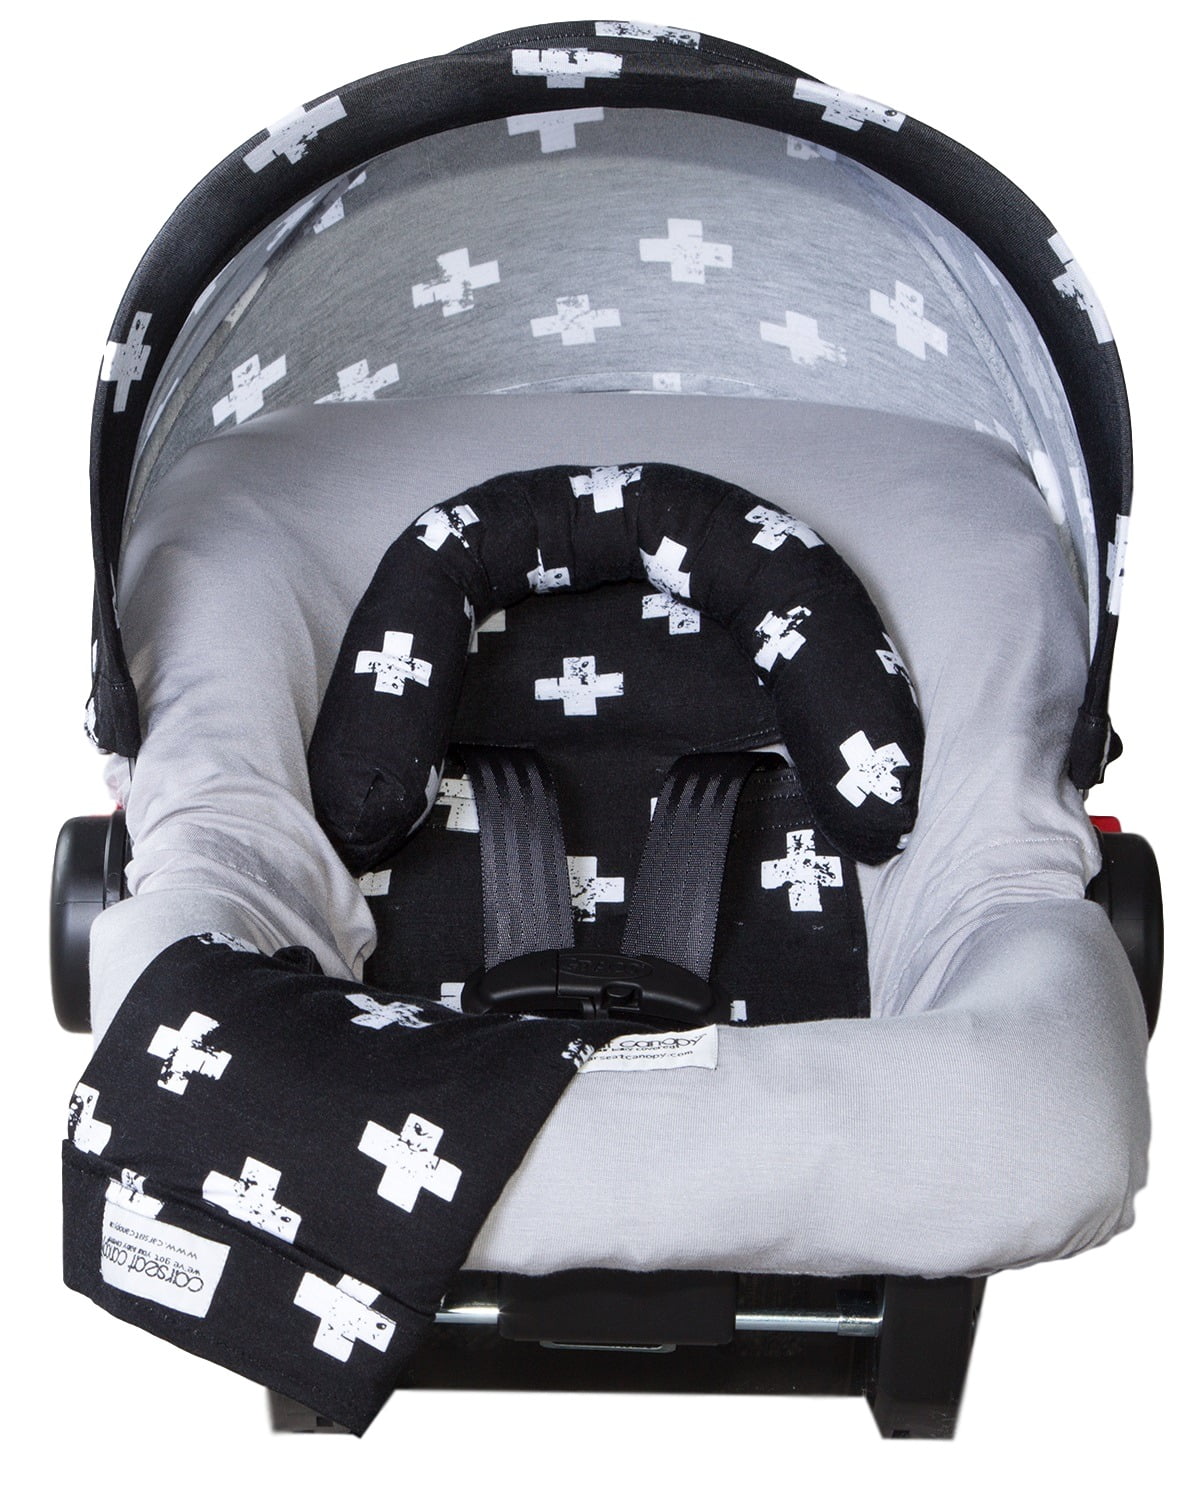 Jersey Stretch Whole Caboodle Carseat Canopy 5 piece Set Baby Infant Car Seat 